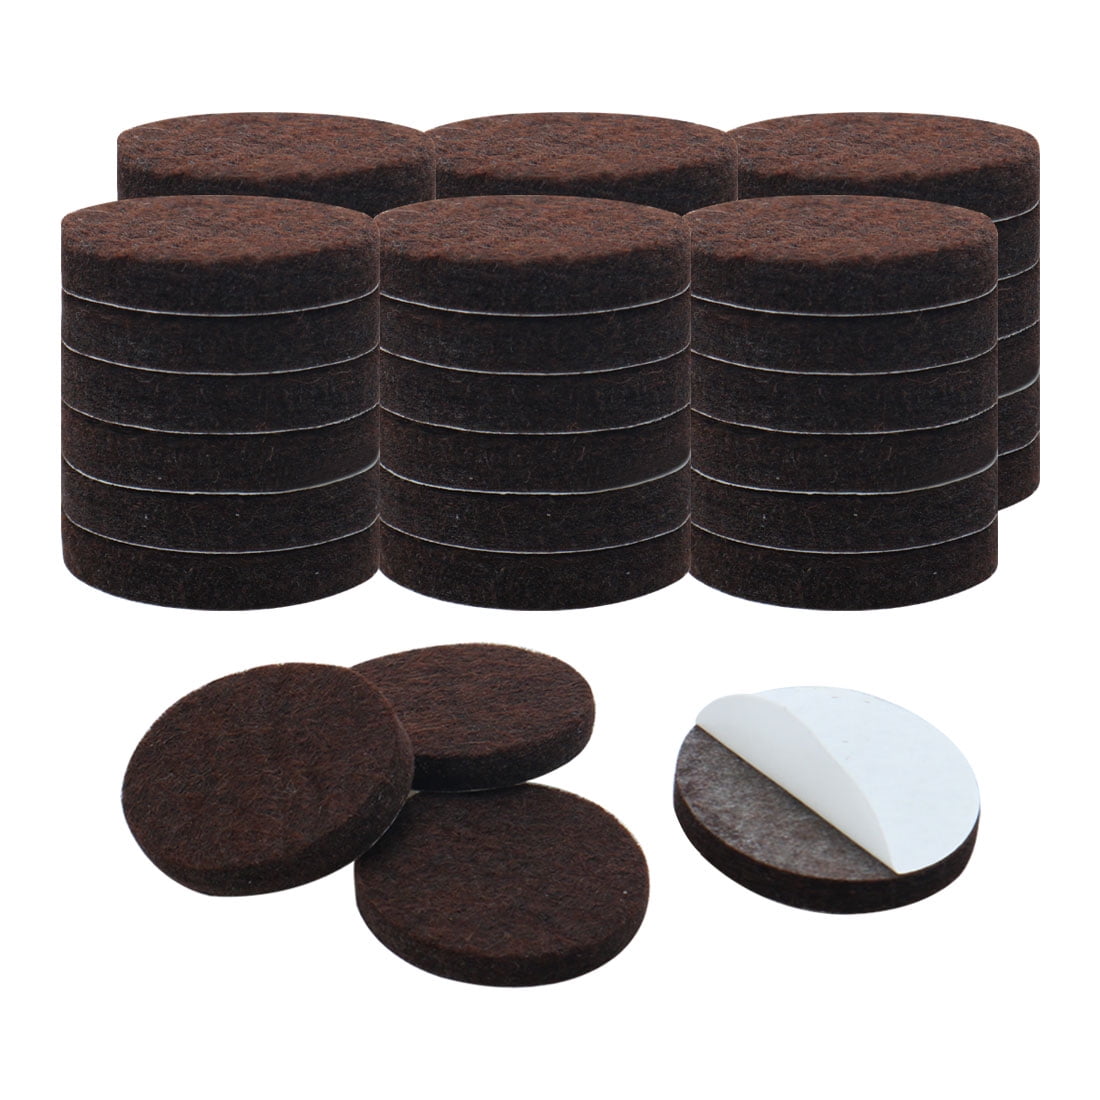 Self Adhesive Felt Furniture Pads Scratch Protection For Floors Walls L3X6 